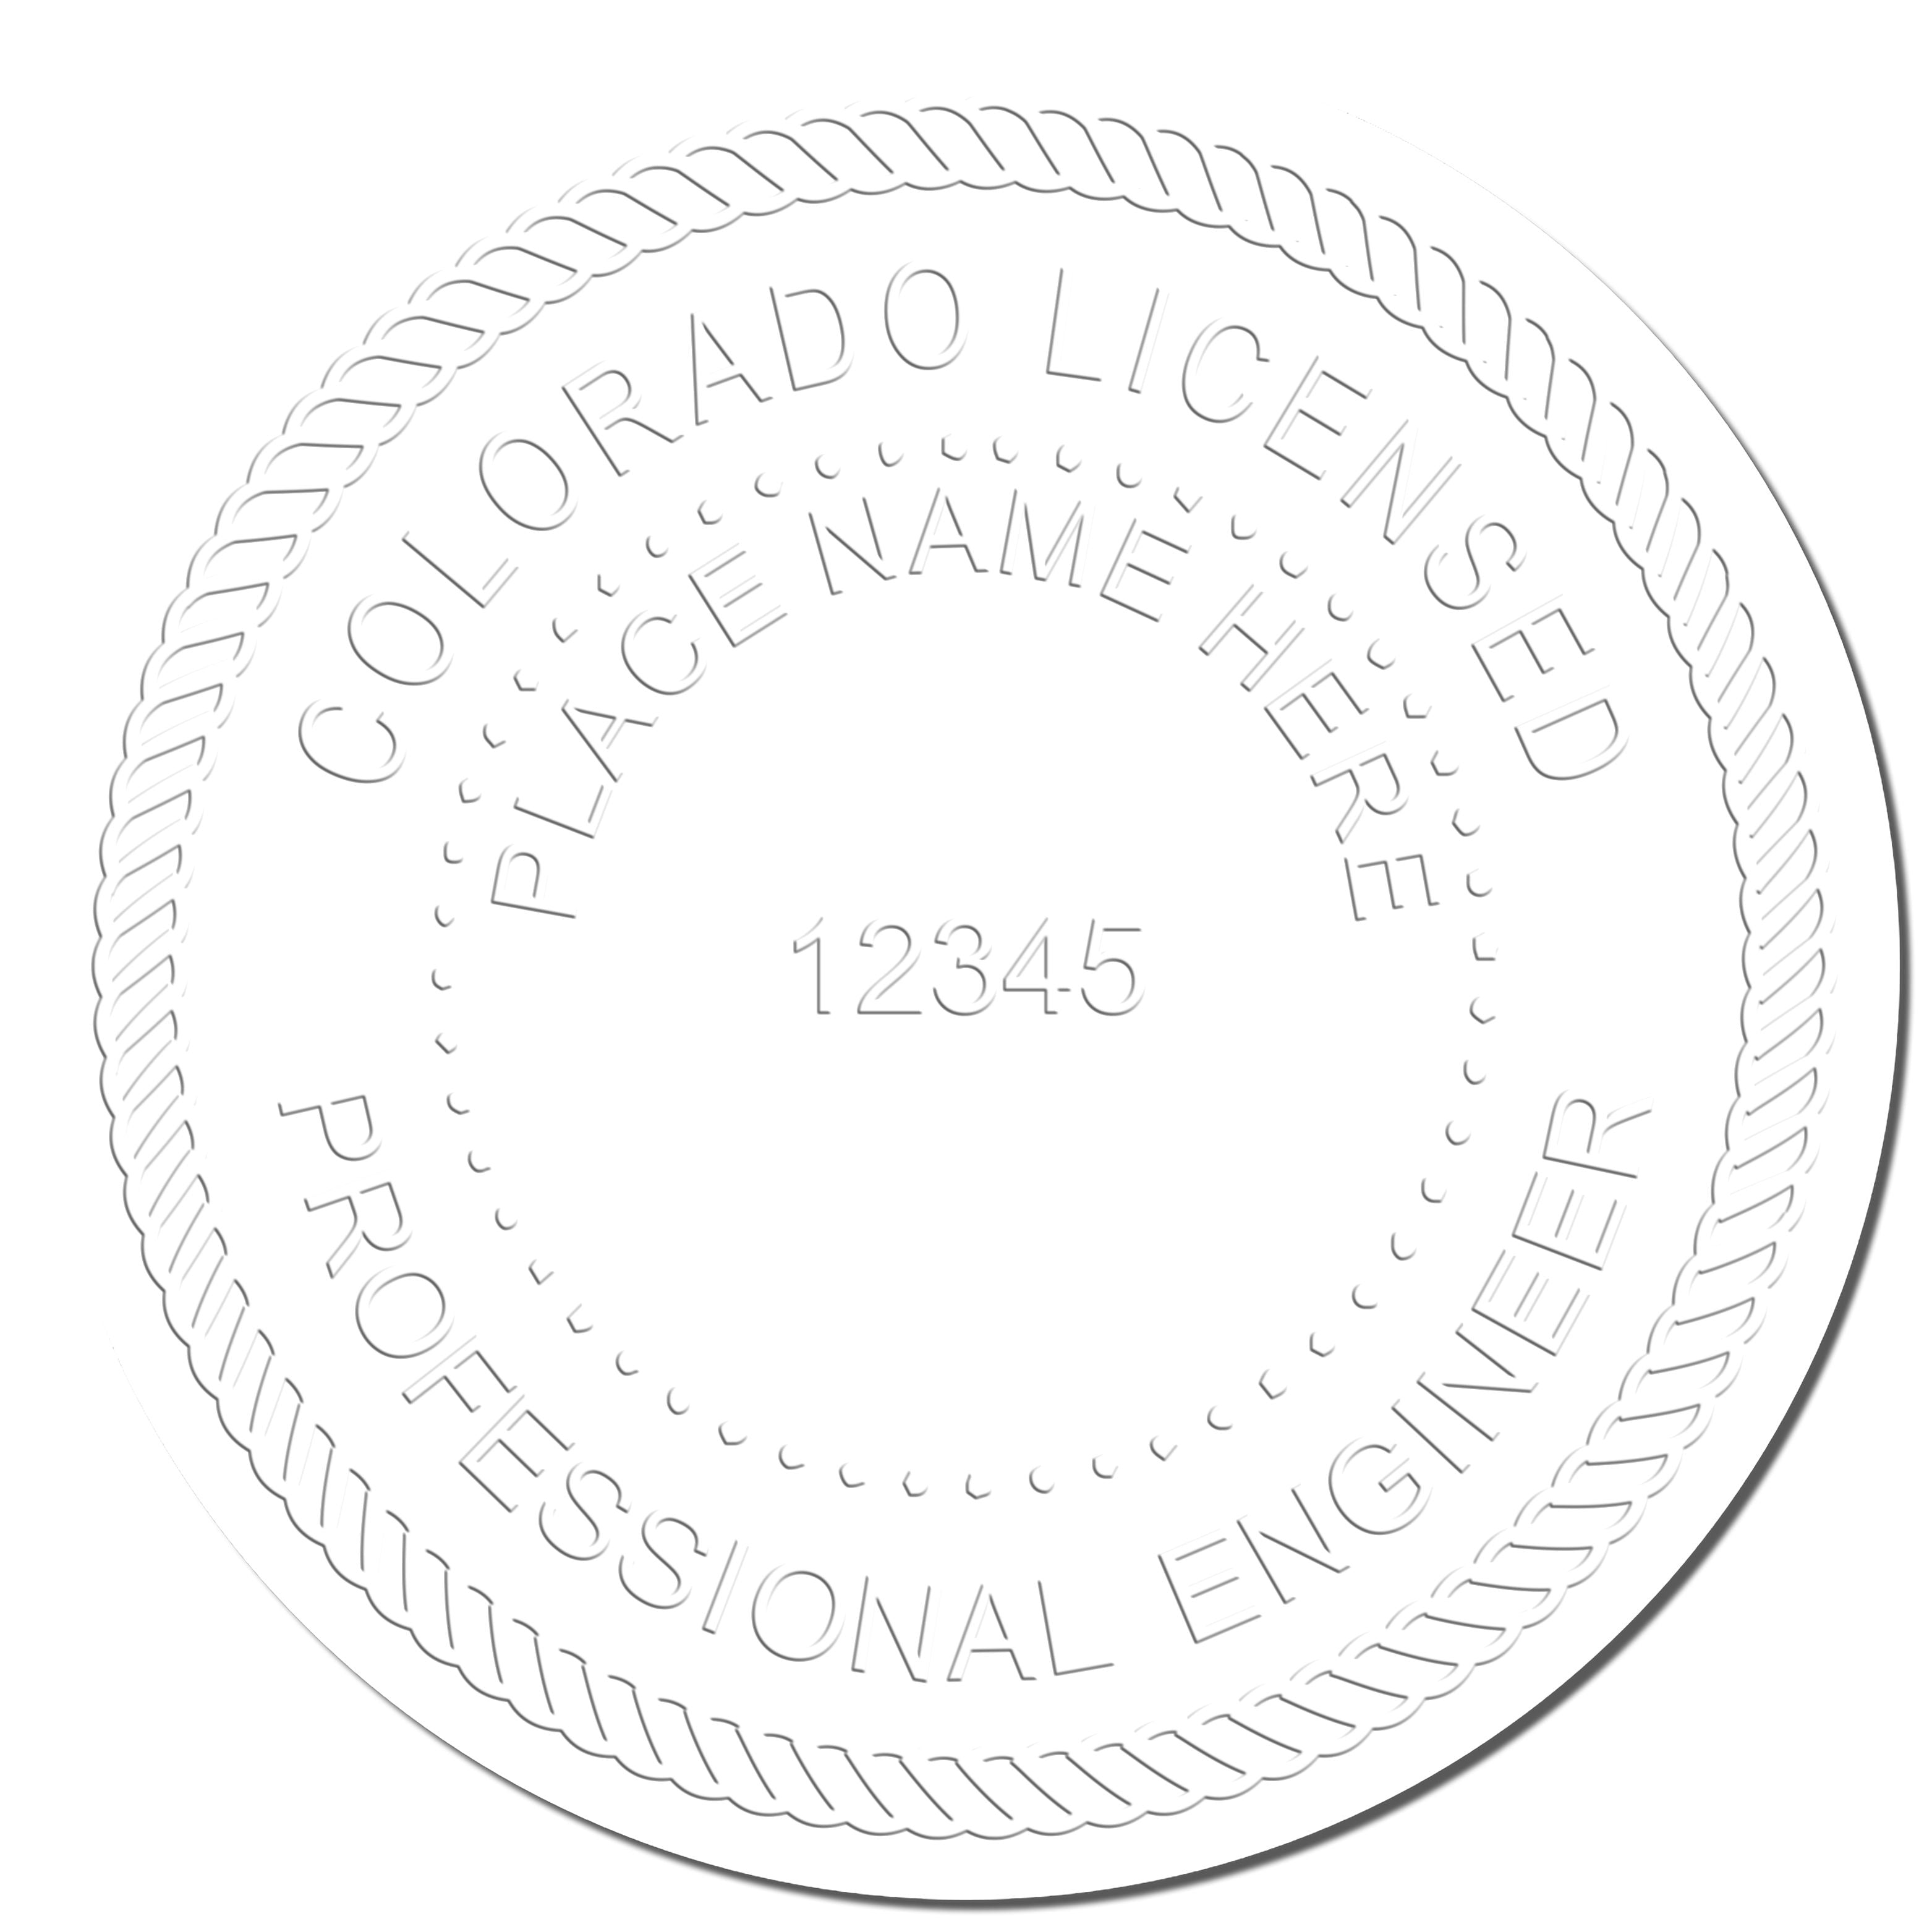 The Long Reach Colorado PE Seal stamp impression comes to life with a crisp, detailed photo on paper - showcasing true professional quality.